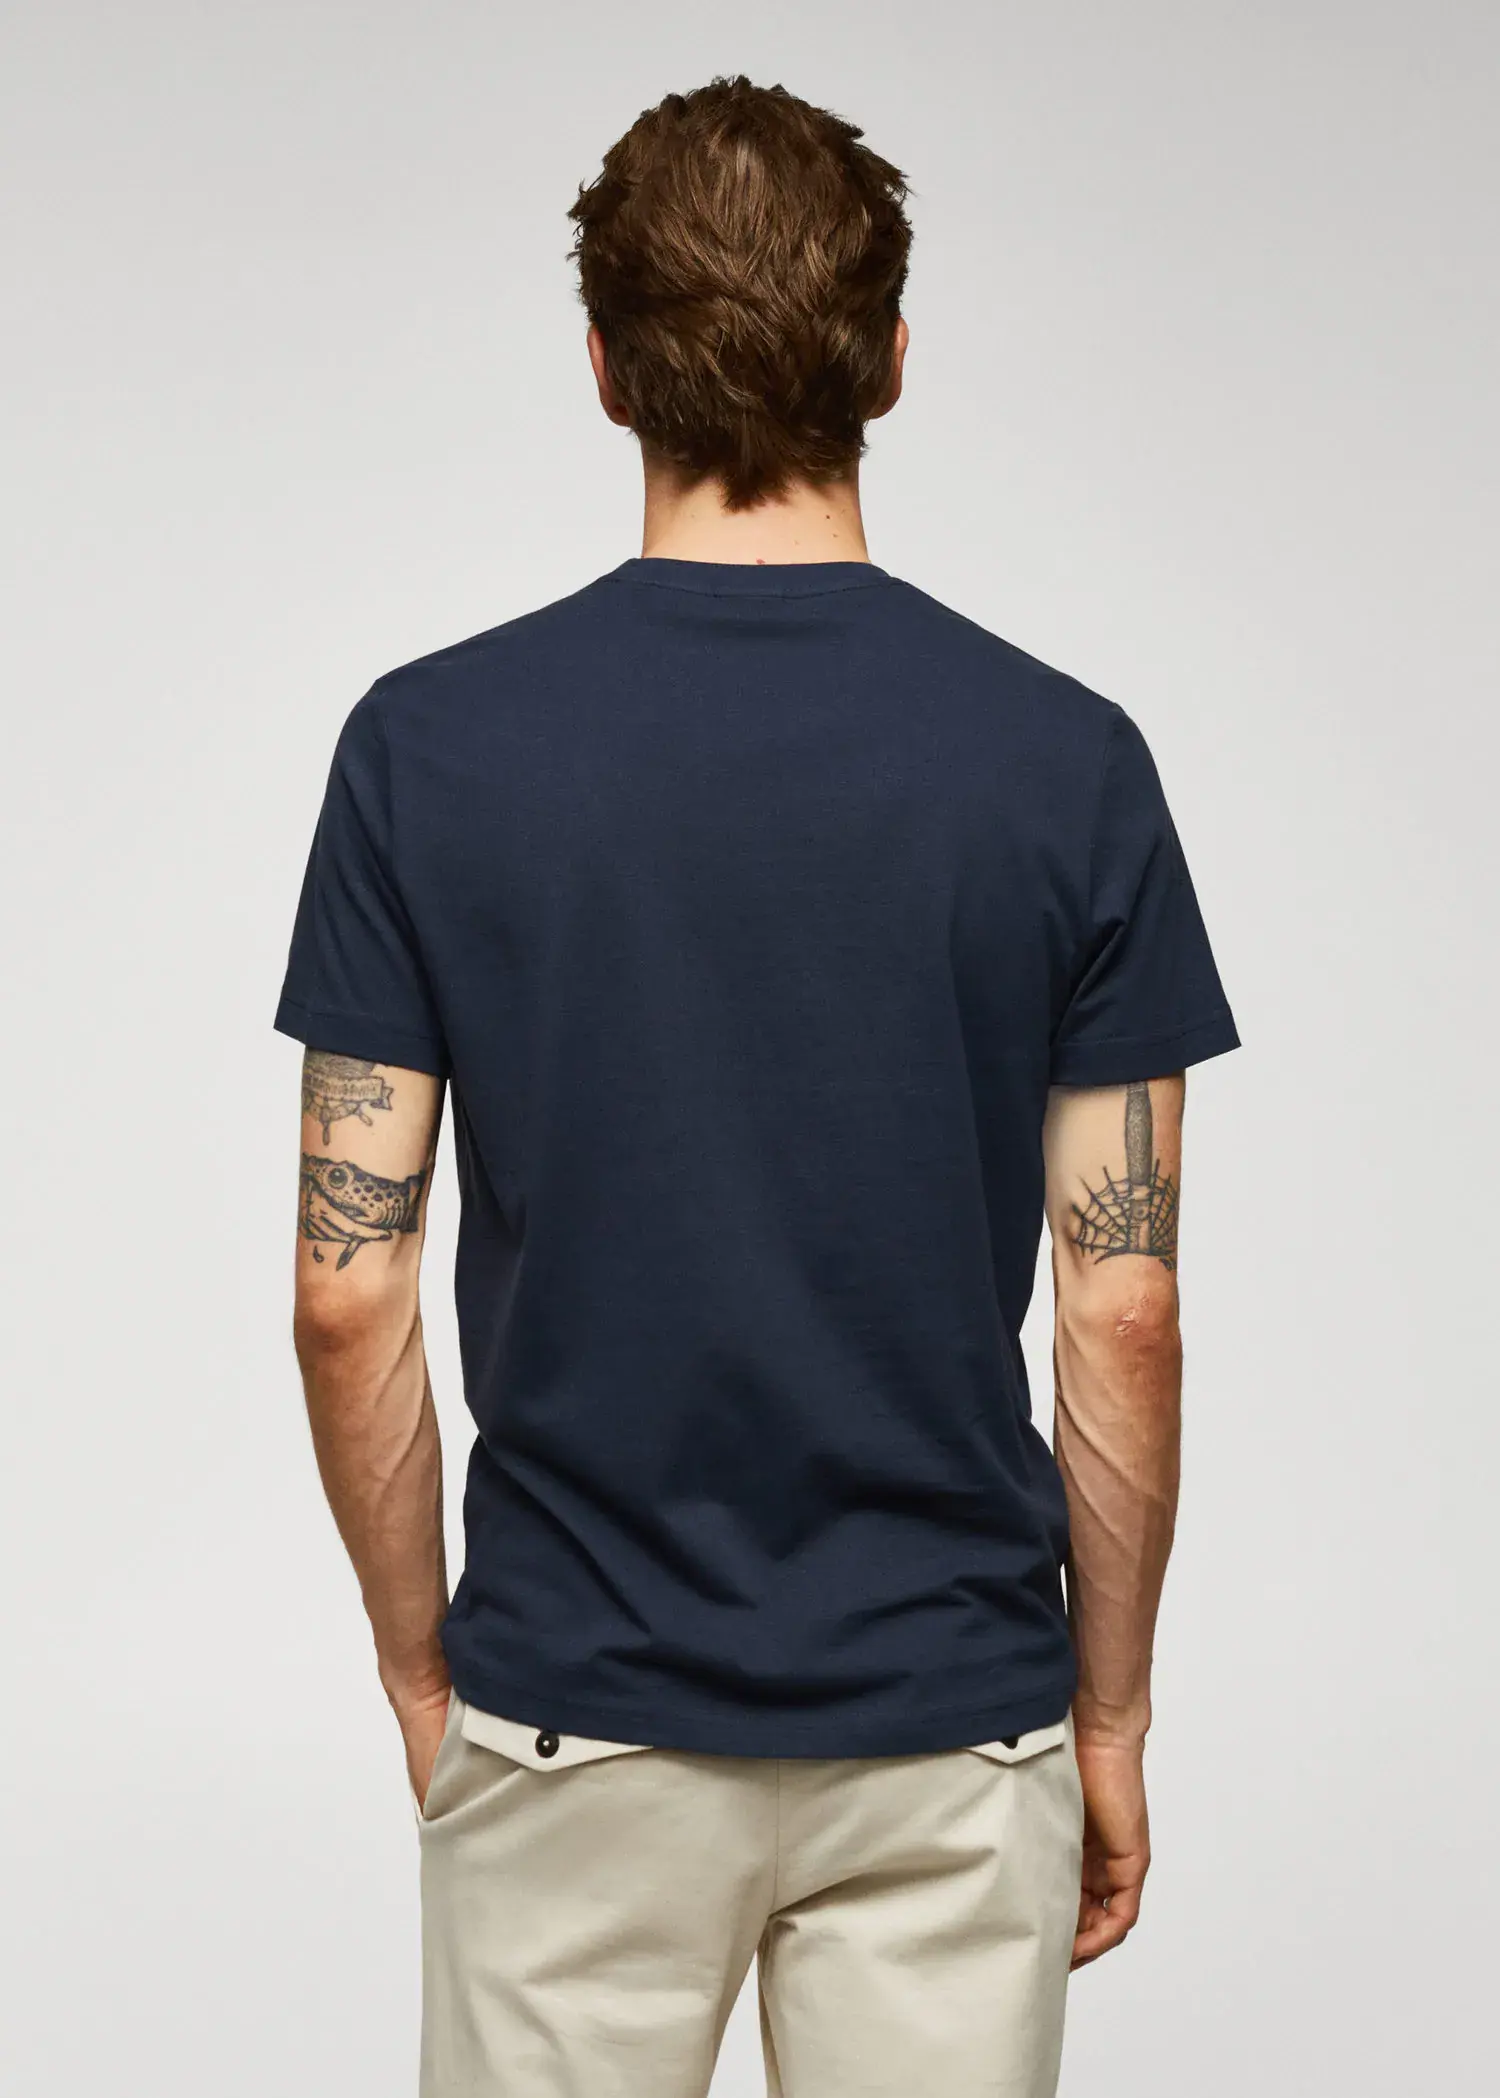 Mango 100% cotton t-shirt with logo. a man wearing a t-shirt with tattoos on his arms. 